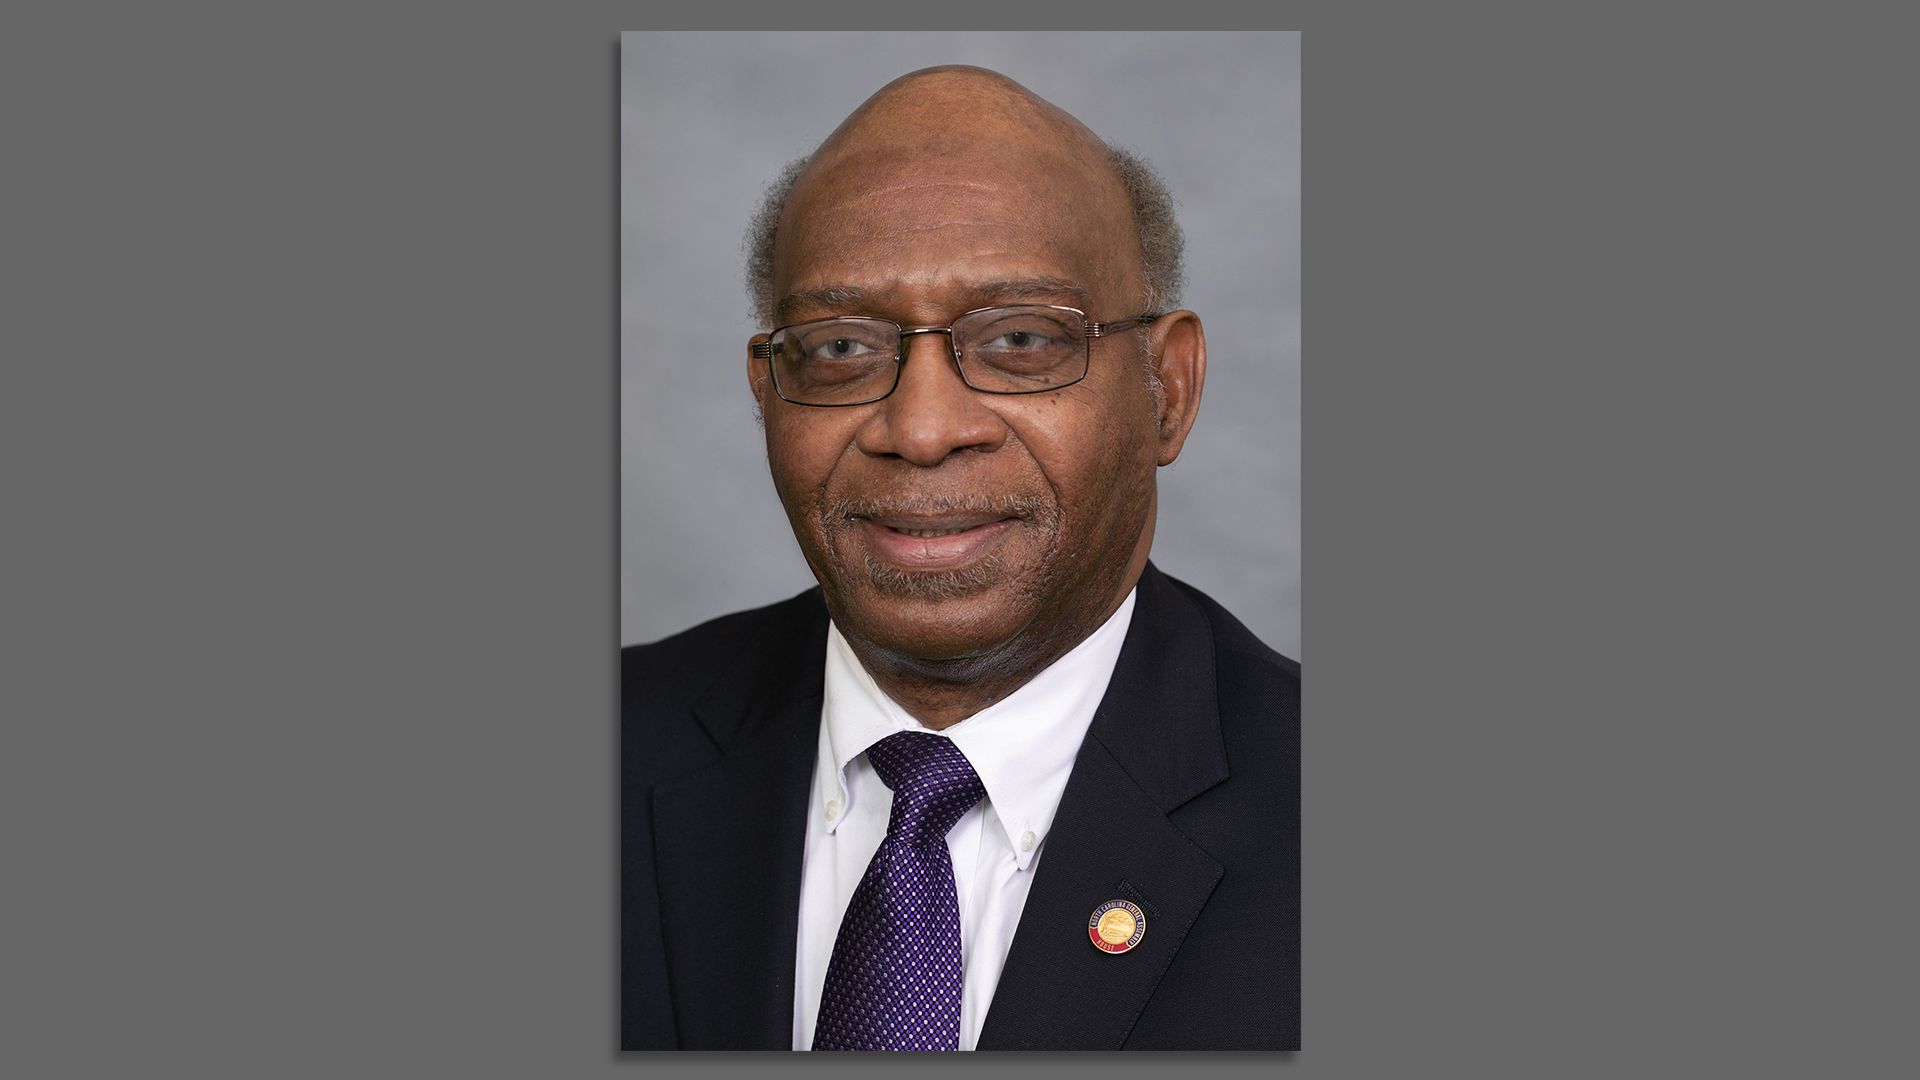 A portrait of NC state lawmaker Terry Garrison